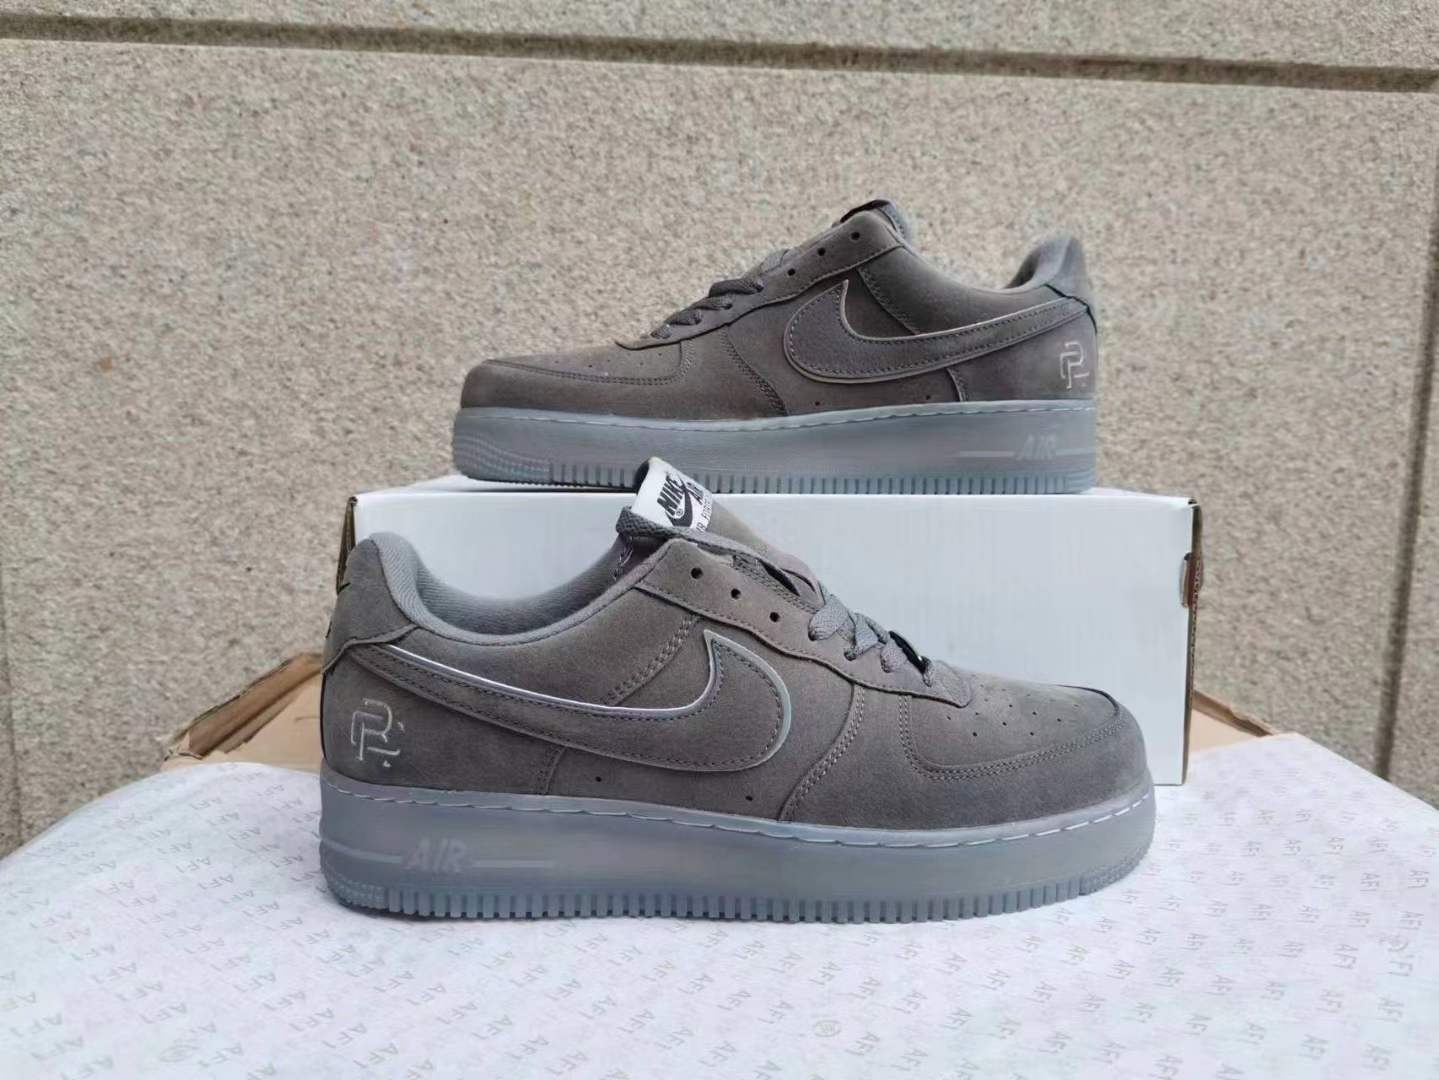 Mwacheezy Collection on Twitter: "Are you a fan of the Reigning Champ x Nike  Air Force 1 Low 'Reflective'? Size 40 to 45 retailing at Ksh.3900  #IkoKiatuKe https://t.co/QlNVbaerEc" / Twitter